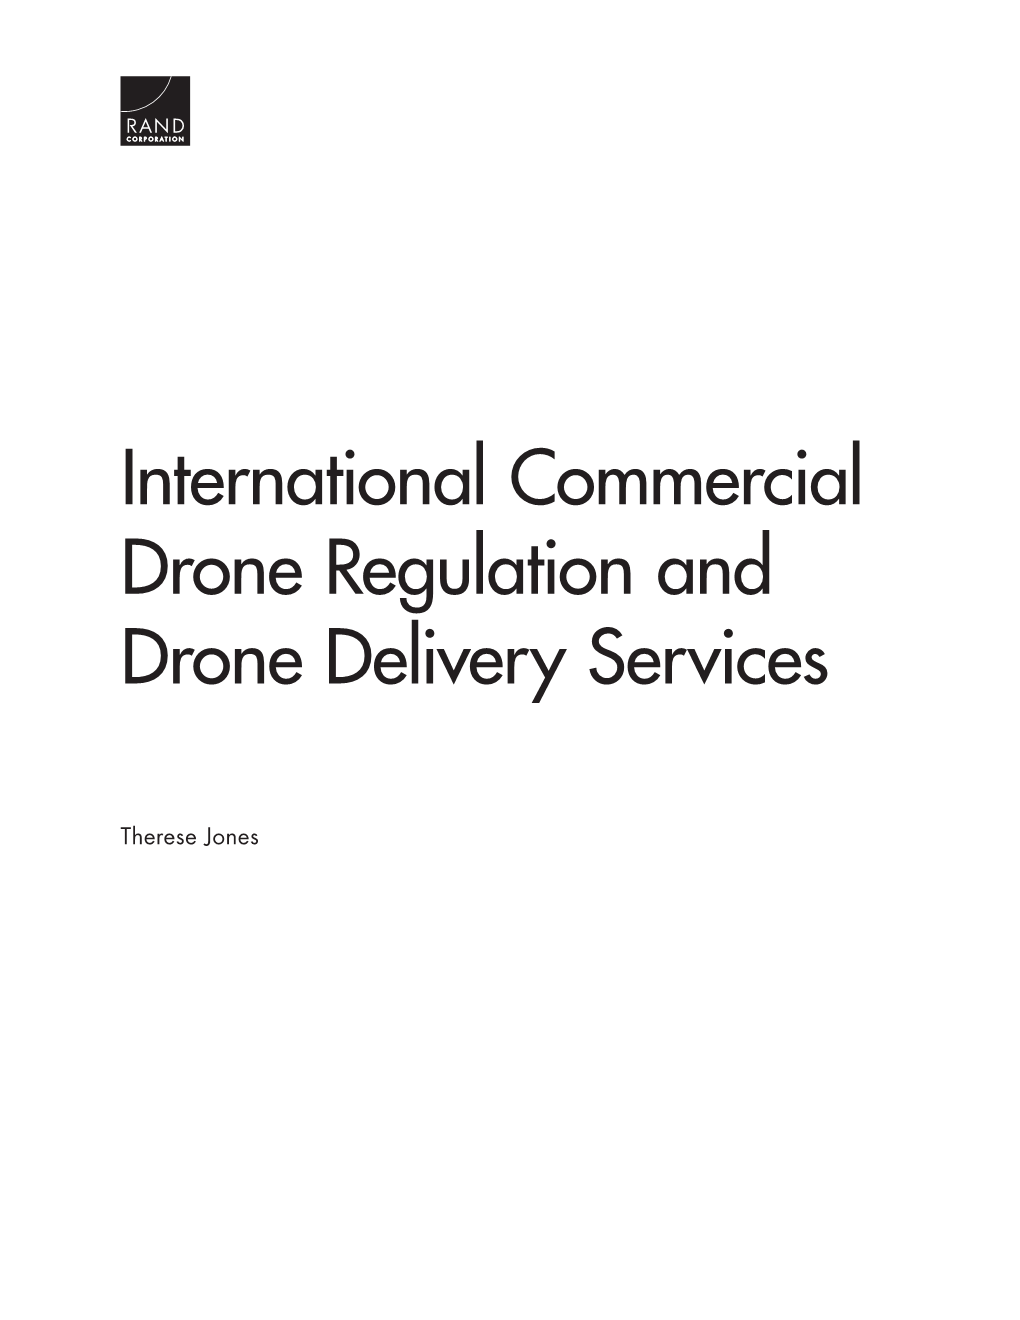 International Commercial Drone Regulation and Drone Delivery Services